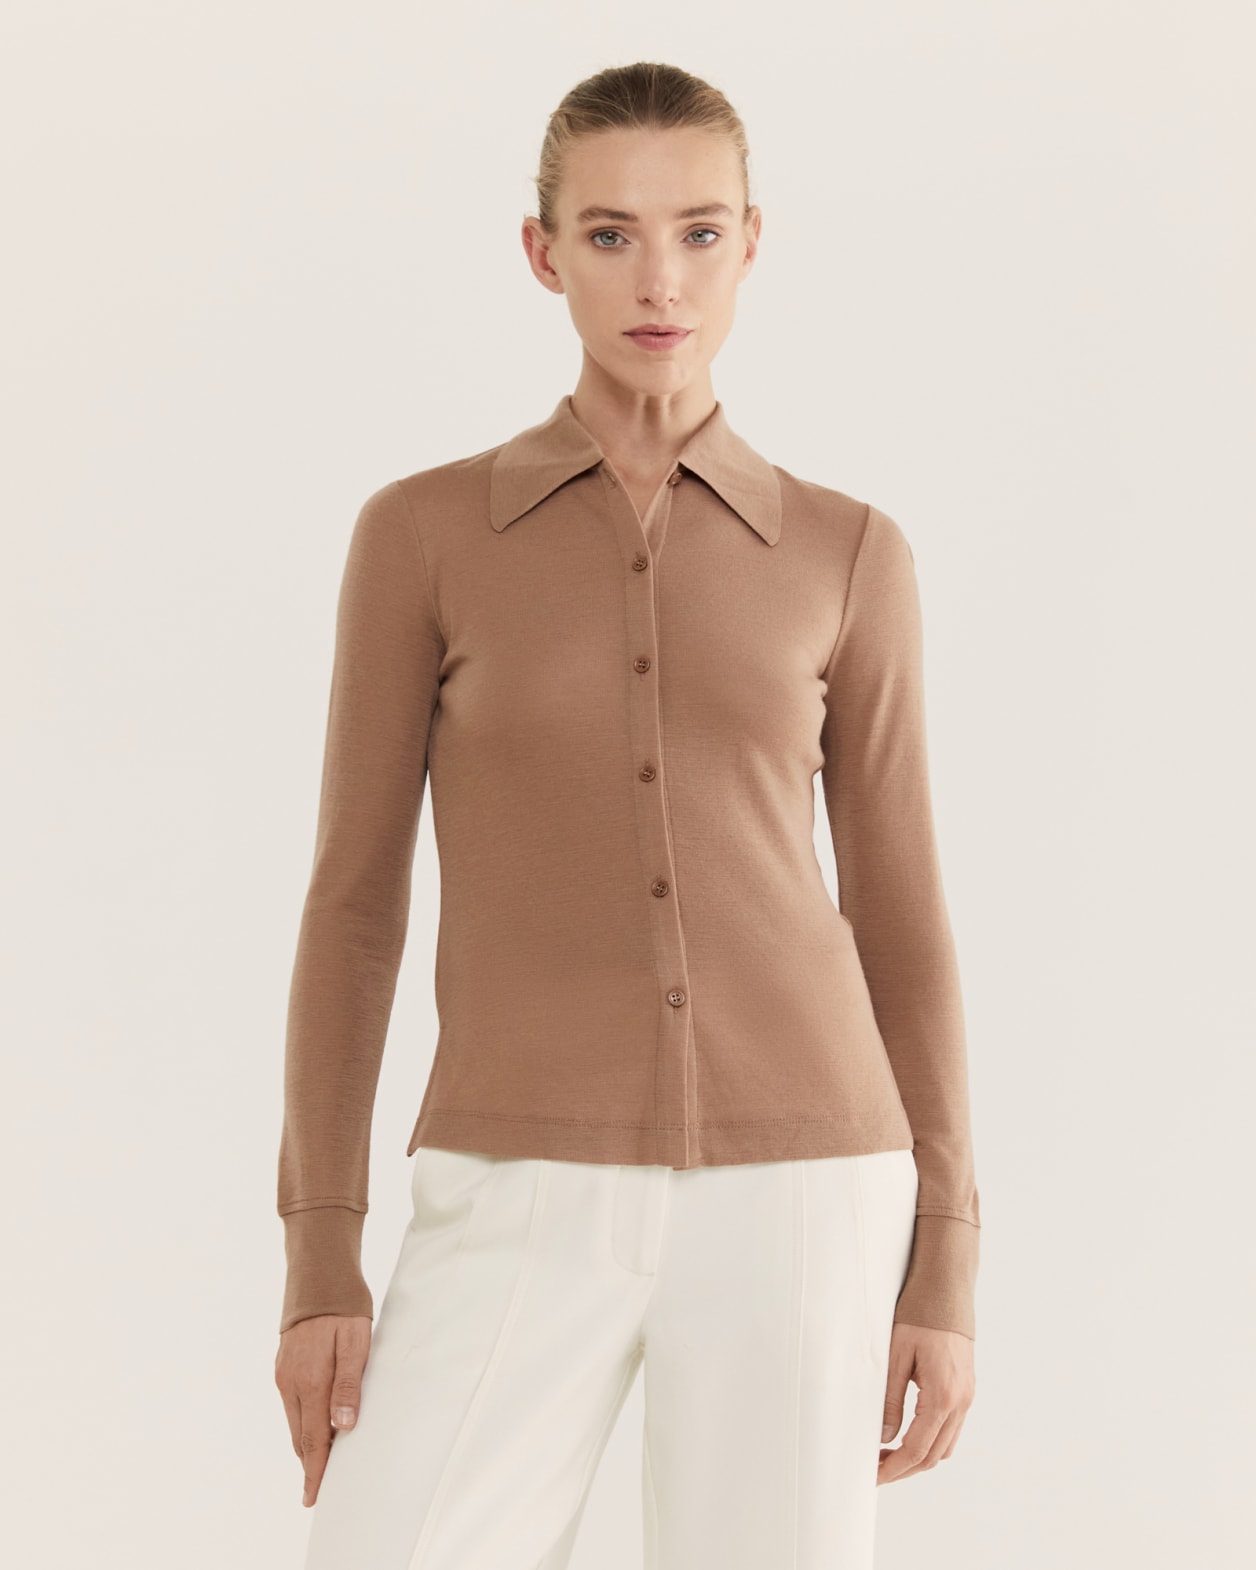 Coco Long Sleeve Polo in ALMOND